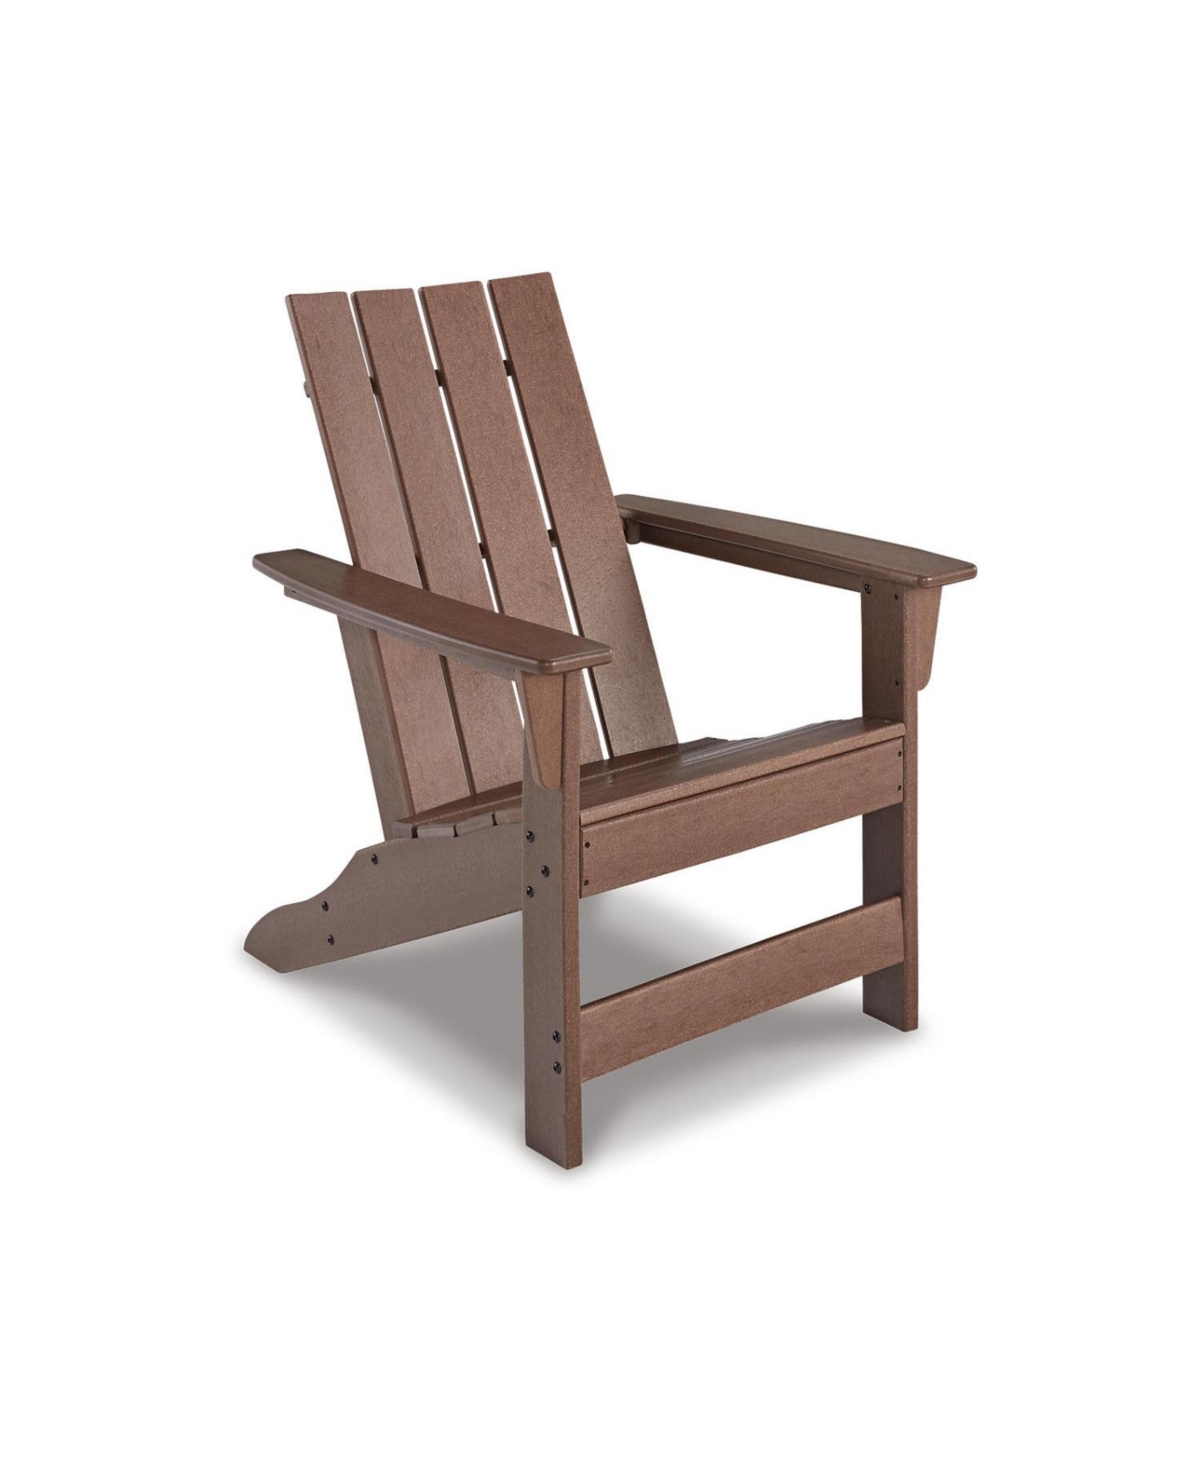 Signature Design By Ashley Emmeline Adirondack Chair In Brown